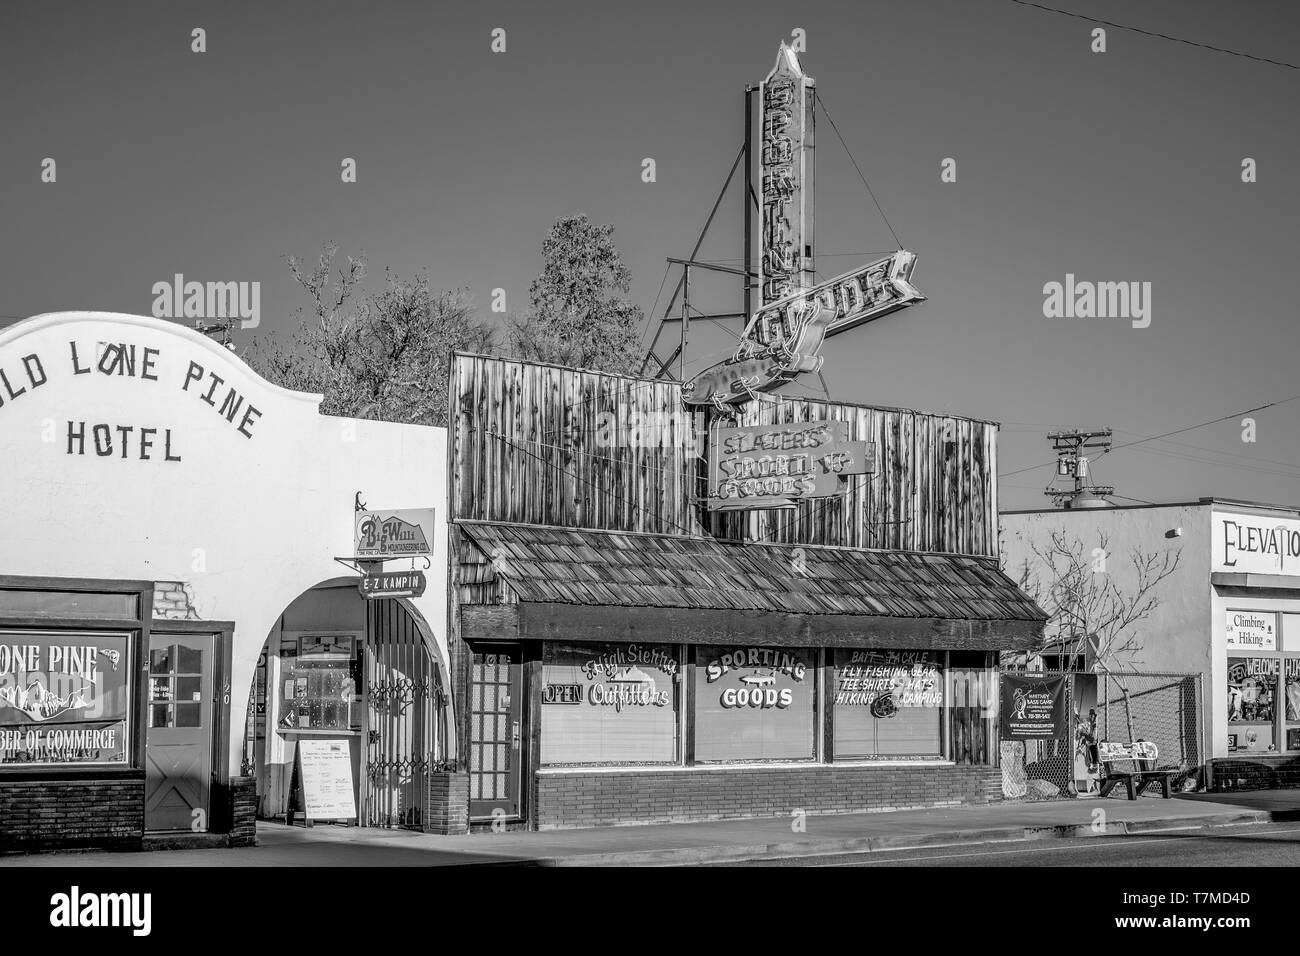 Old wooden buildings in the historic village of Lone Pine - LONE PINE CA, UNITED STATES OF AMERICA - MARCH 29, 2019 Stock Photo